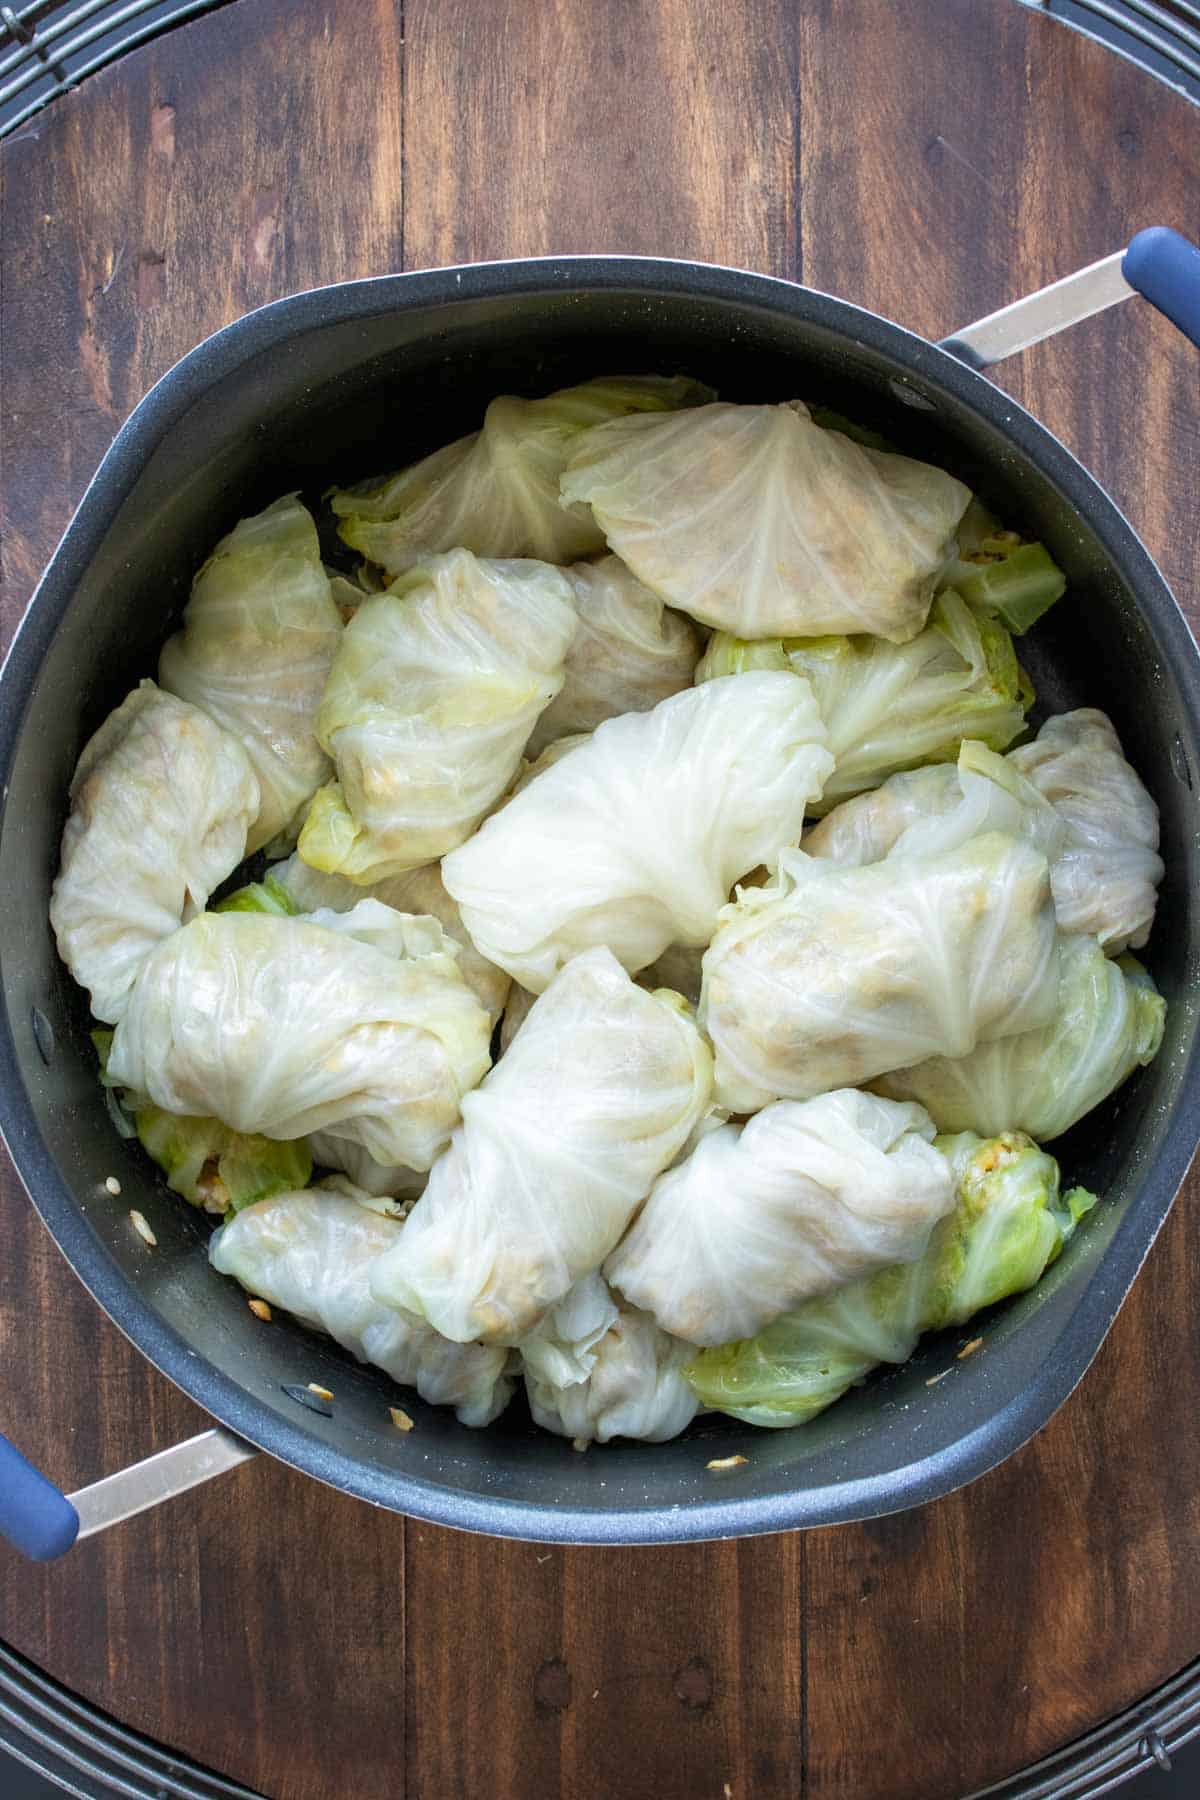 Rolls of stuffed cabbage piled into a black pot